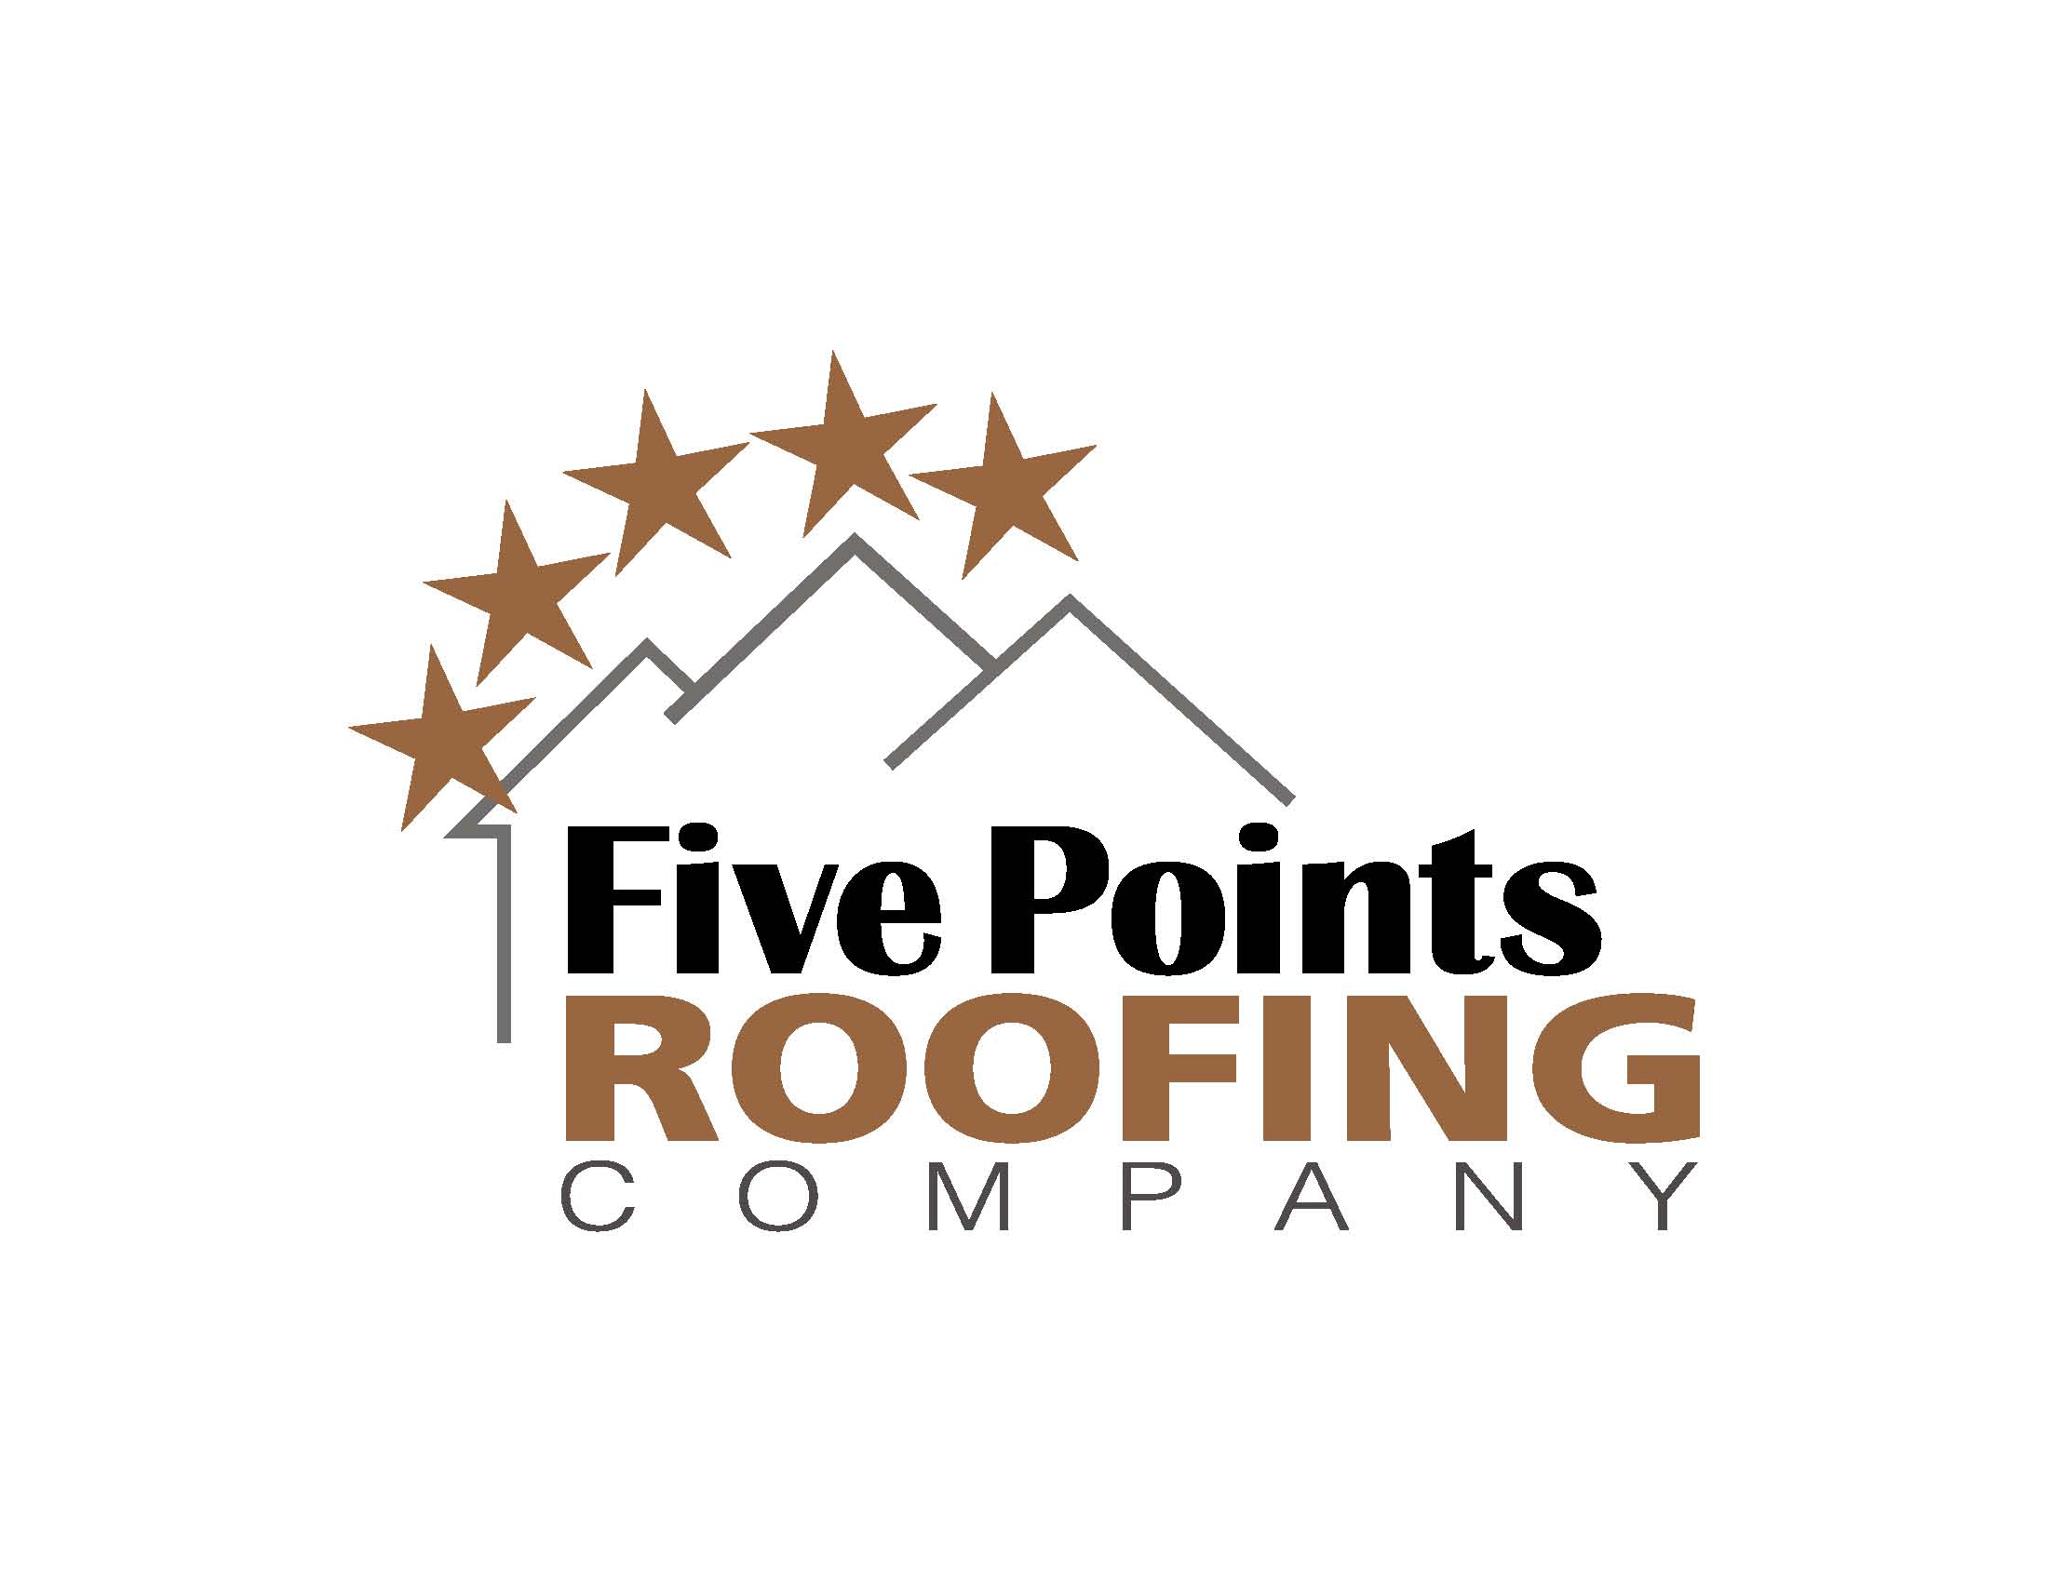 Five Points Roofing